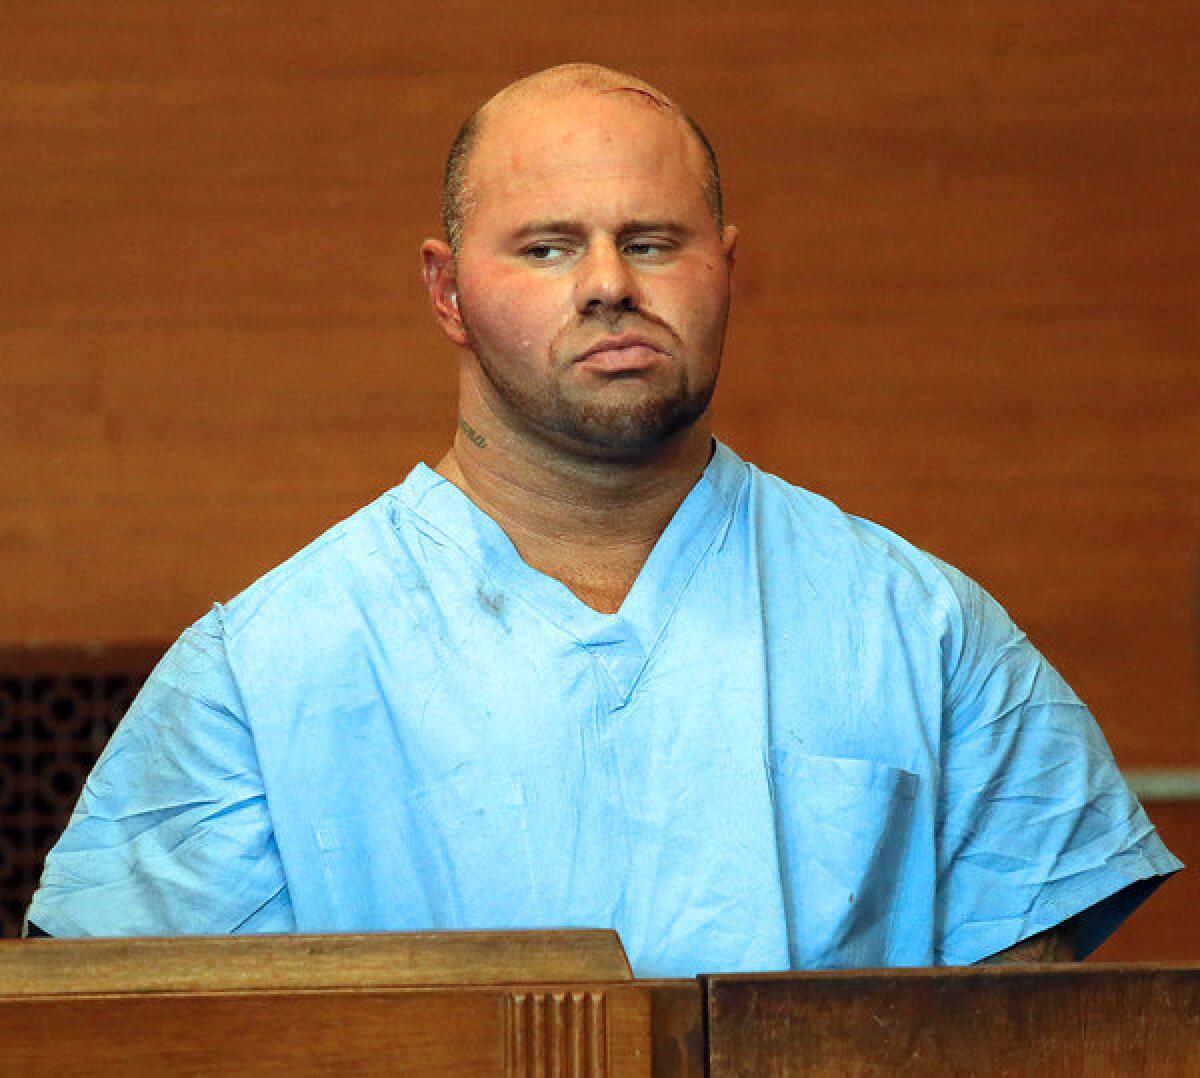 Jared Remy appears at Waltham, Mass., District Court for his arraignment Friday on domestic assault and battery charges in connection with the death of his girlfriend, 27-year-old Jennifer Martel. Remy is the son of longtime Boston Red Sox broadcaster Jerry Remy.